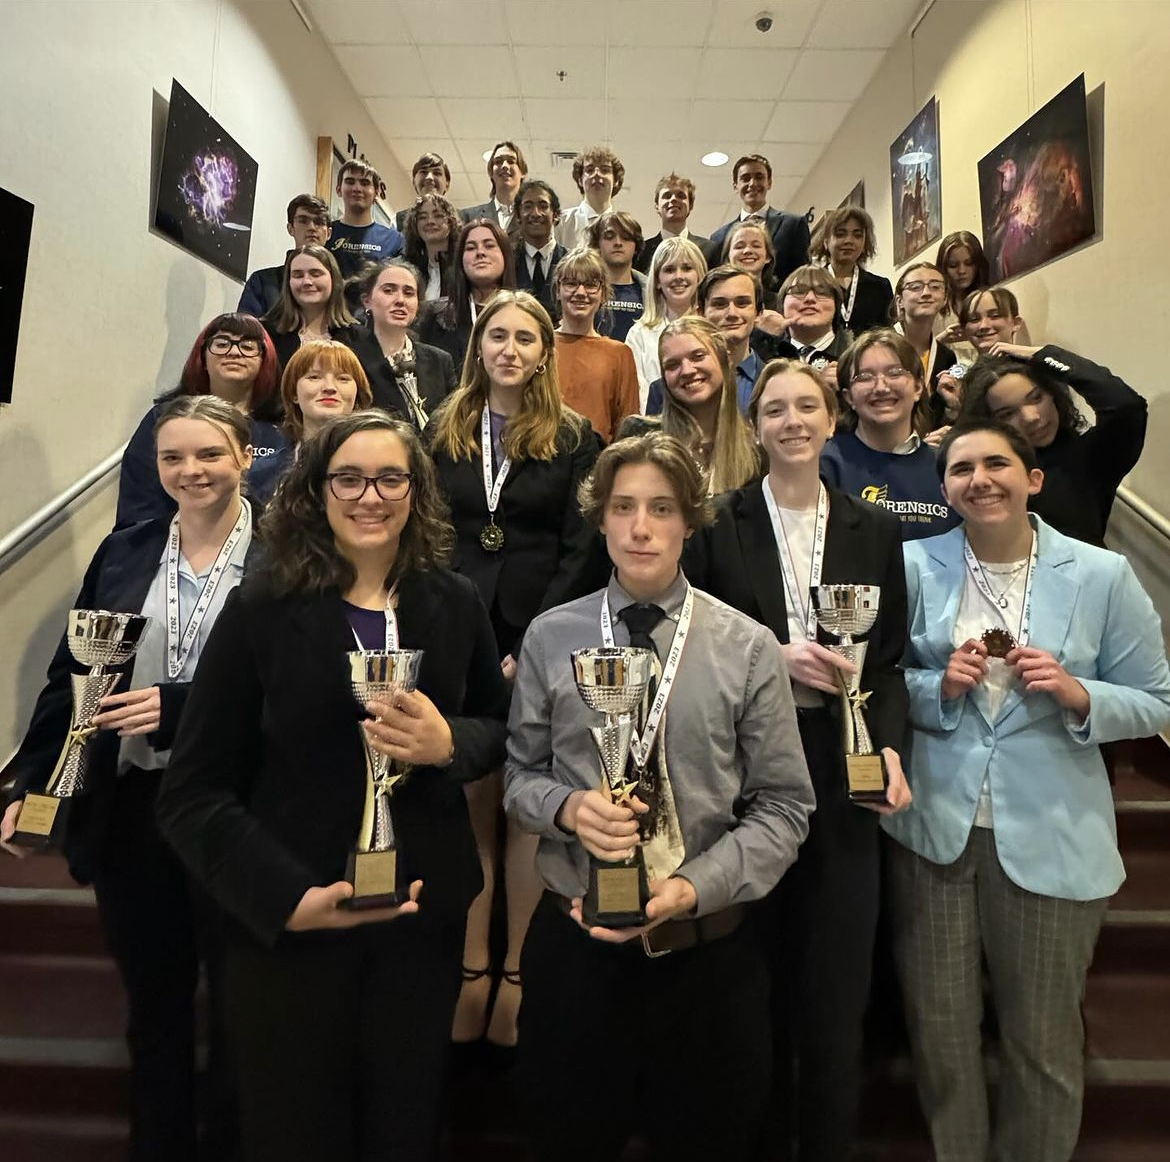 The+FCHS+Forensics+team+after+winning+at+TOC+on+January+20th.+Photo+courtesy+of+Craig+Edgerton.